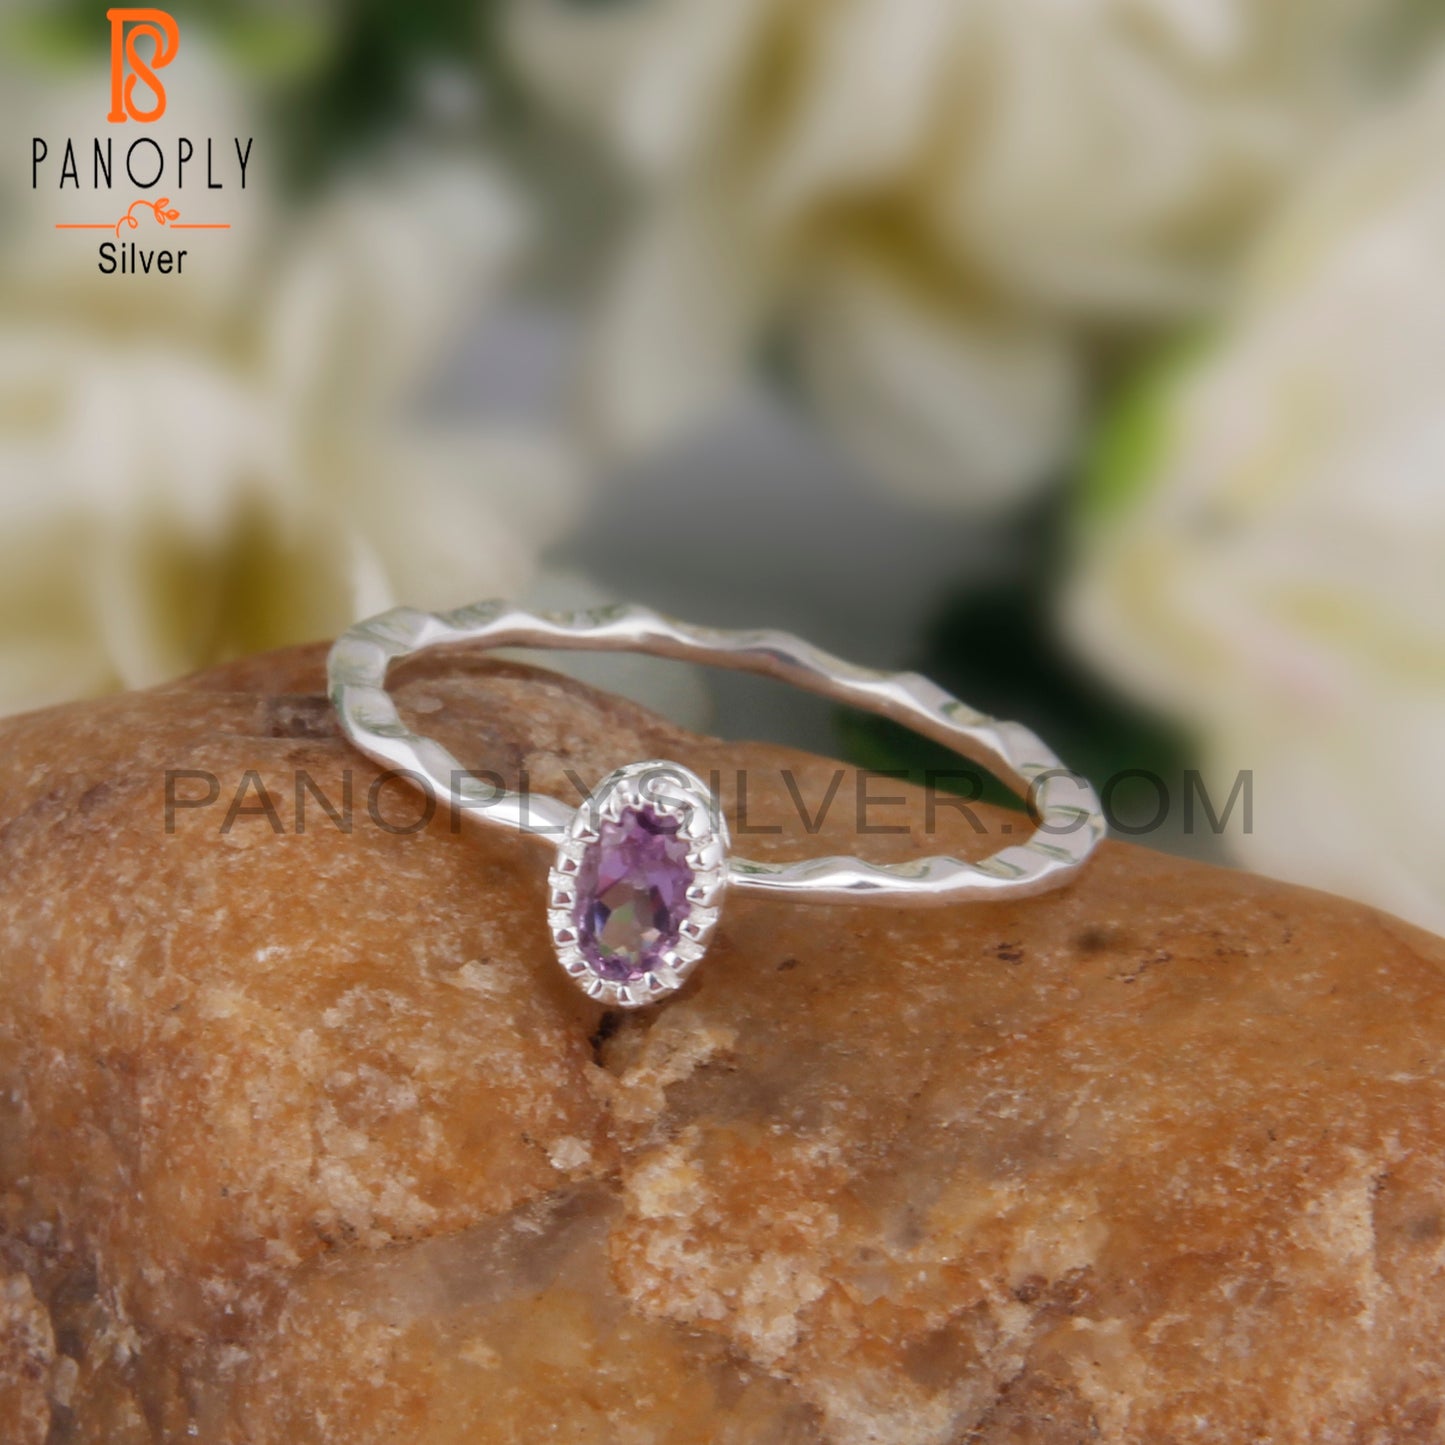 Pink Amethyst Oval 925 Sterling Silver Ring